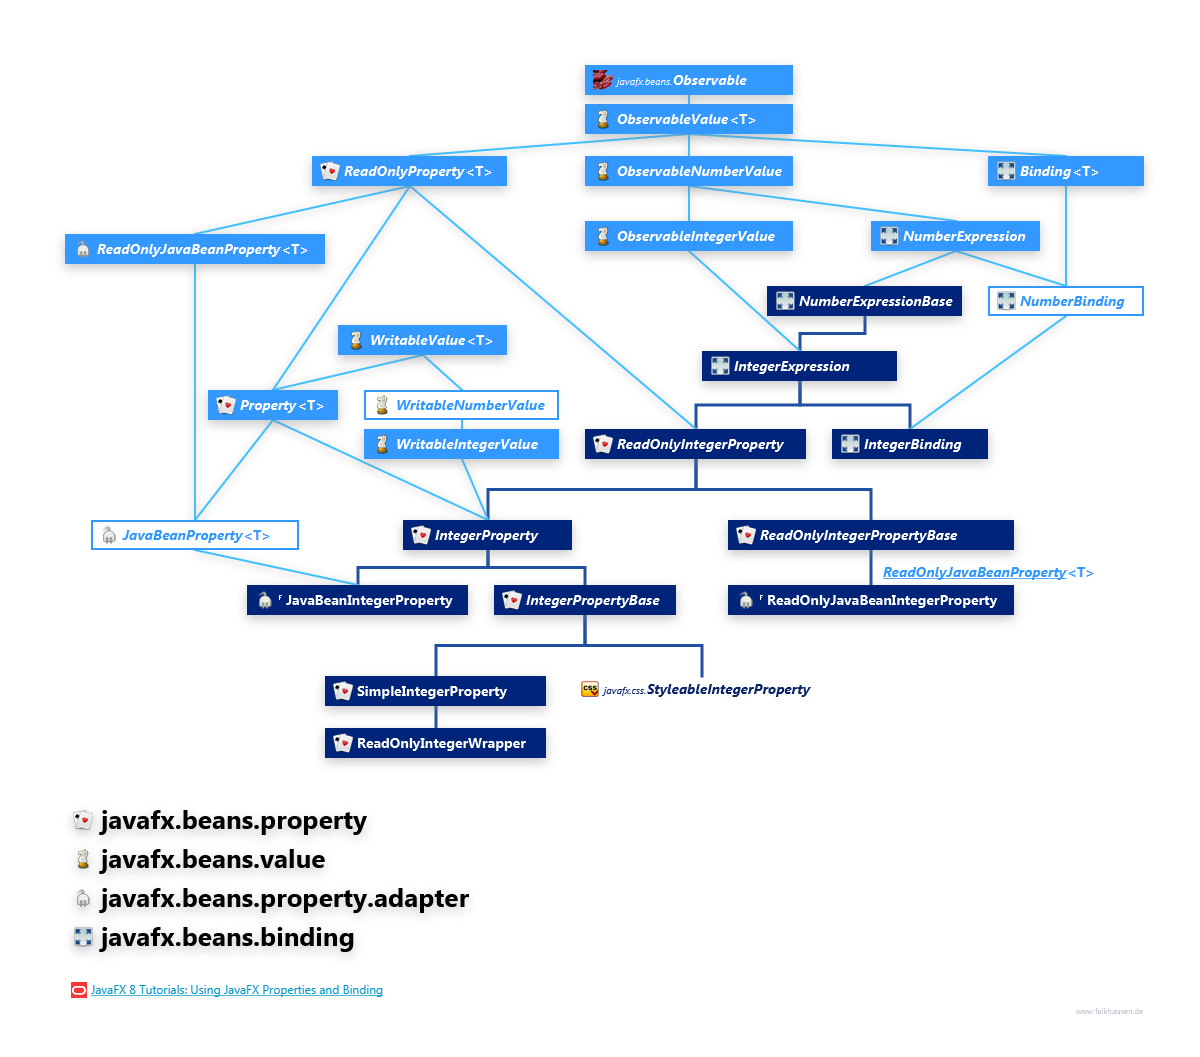 javafx.beans.property javafx.beans.value javafx.beans.property.adapter javafx.beans.binding IntegerProperty Hierarchy class diagram and api documentation for JavaFX 8